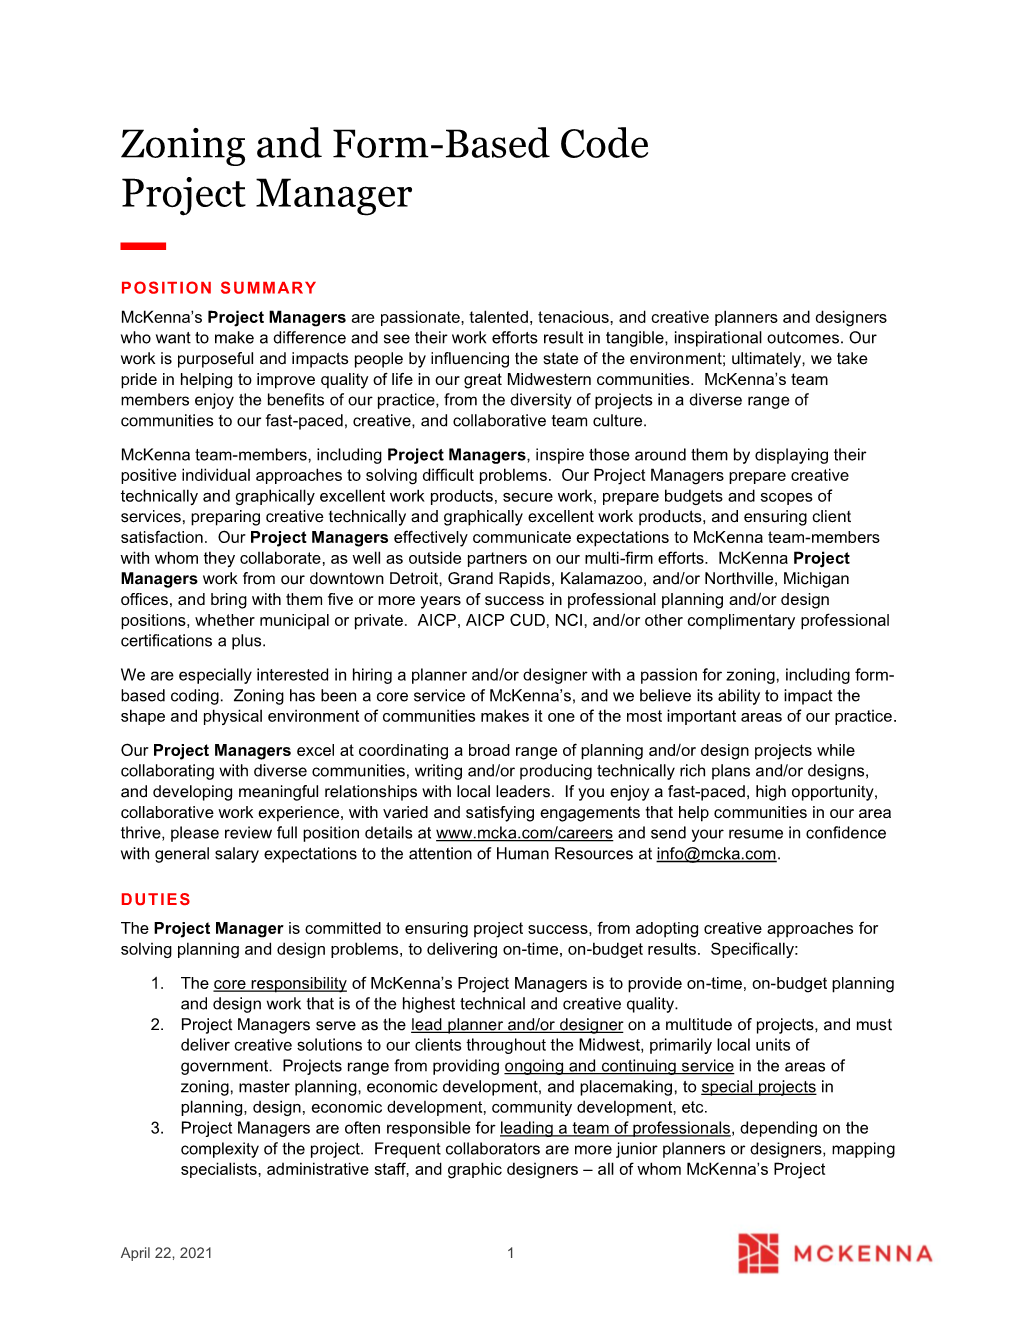 Zoning and Form-Based Code Project Manager